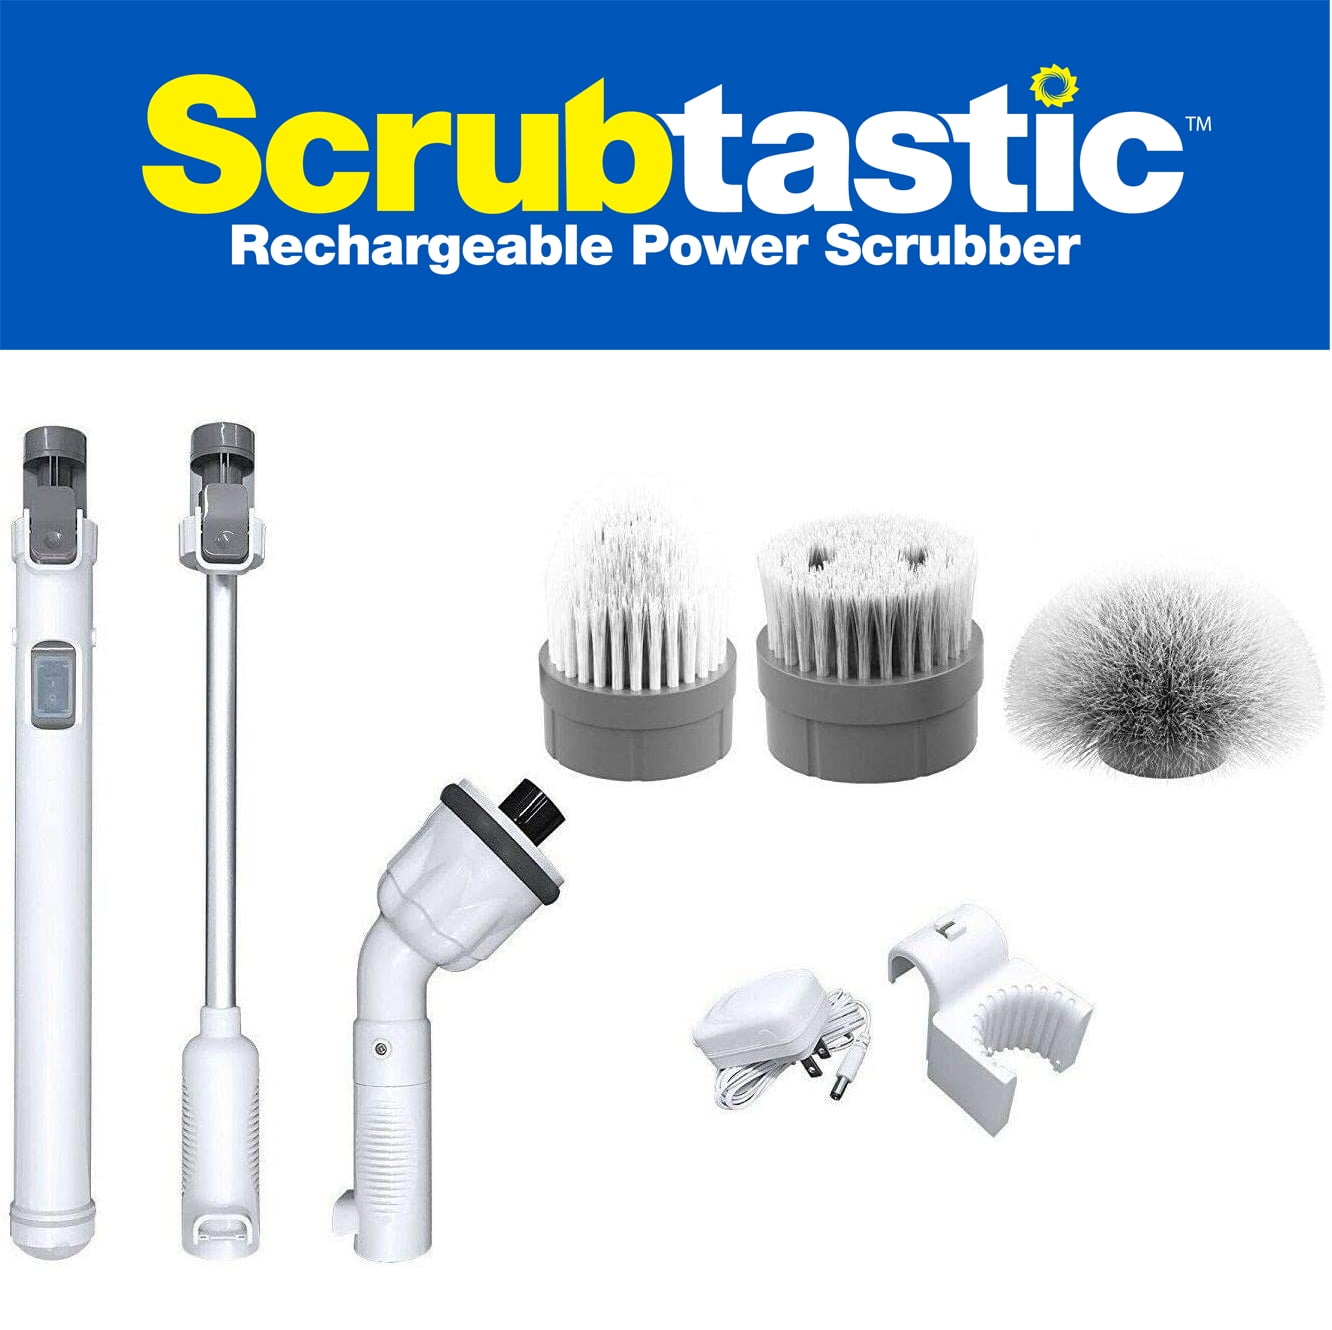 Bell + Howell Scrubtastic 39 in. Multi-Purpose Surface Rechargeable Power Scrubber  Cleaner Scrub Brush with 3 Brush Heads 8048 - The Home Depot